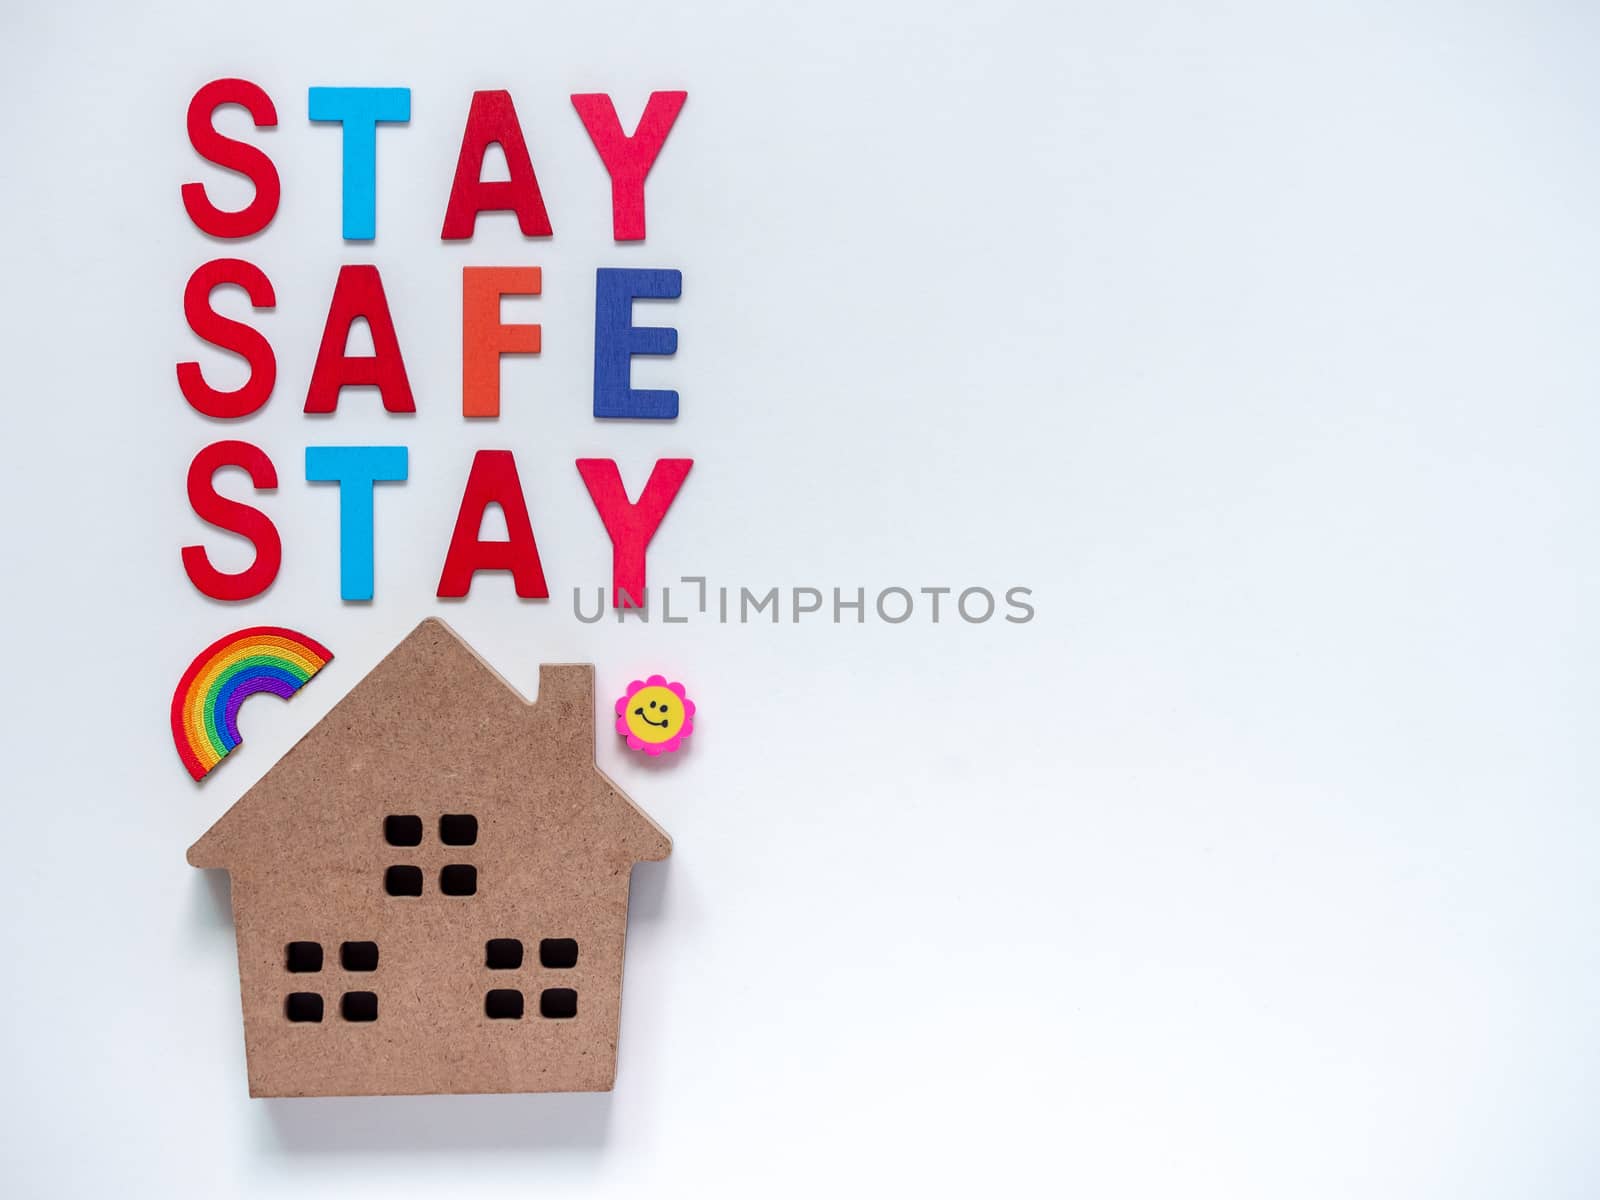 Stay safe concept. Colorful word "Stay Safe" with wooden home isolated on white background with copy space, stay at home, social media campaign for covid-19 or coronavirus pandemic prevention.